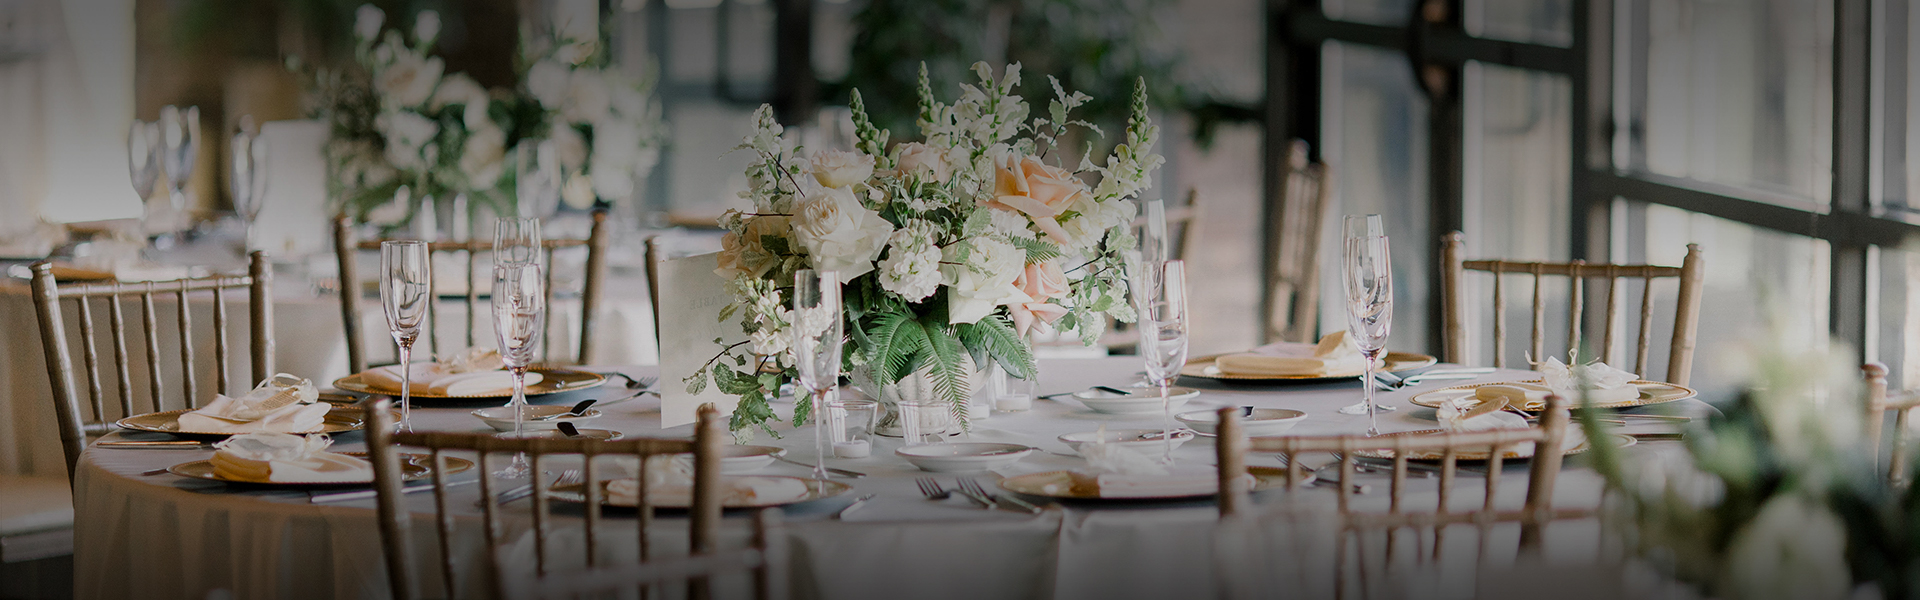 close up of a linen covered table with bamboo chairs and a large floral centerpiece